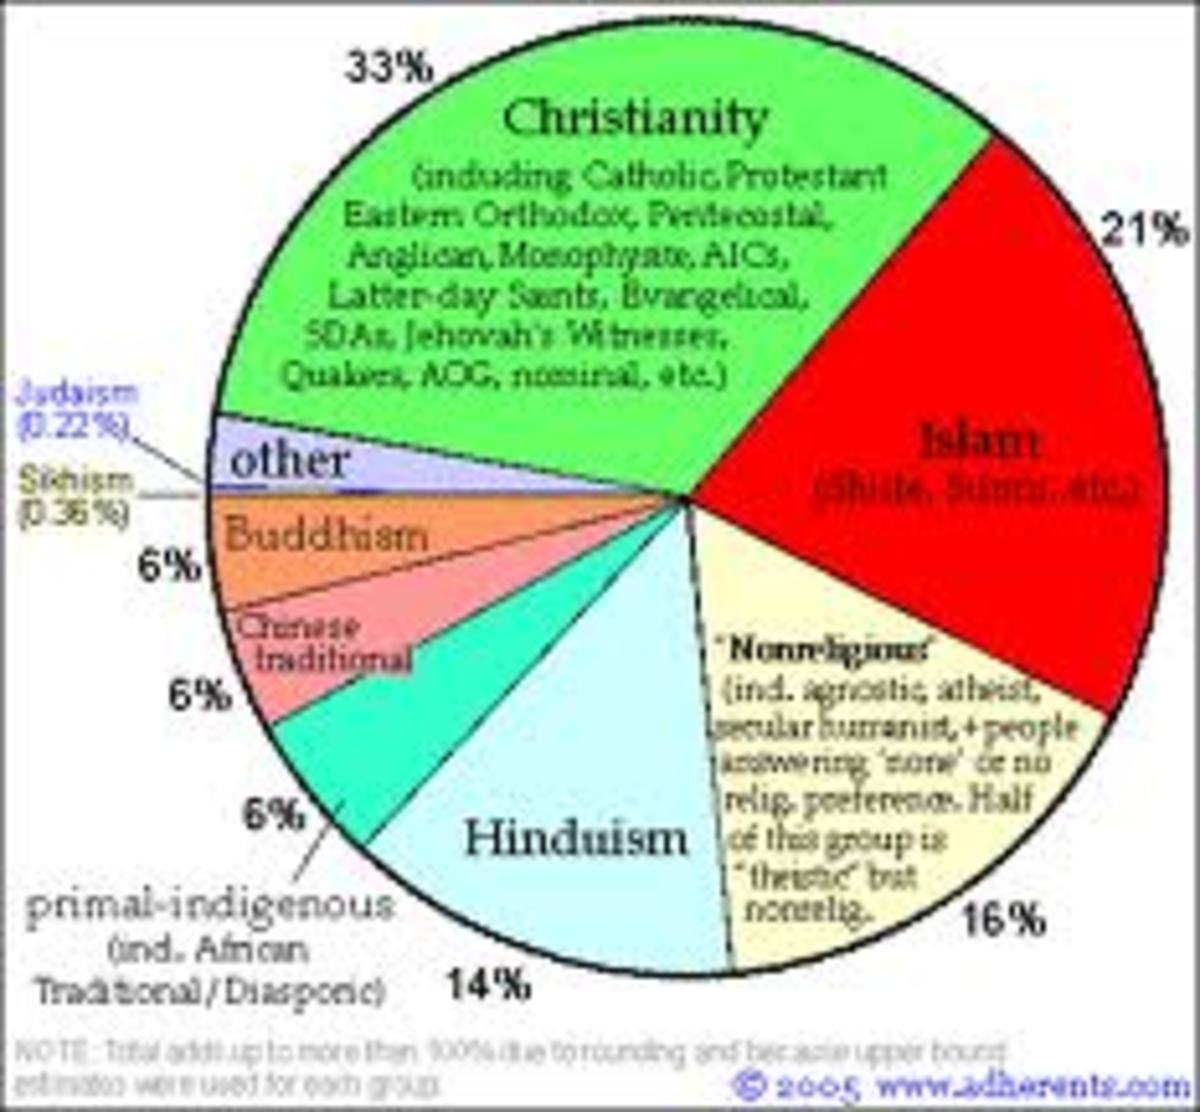 These are the main religions of the world, of course there are a lot more than what is shown here, therefore it is only natural that they do not agree with each other at times, so a new collective religious way could be welcome?  